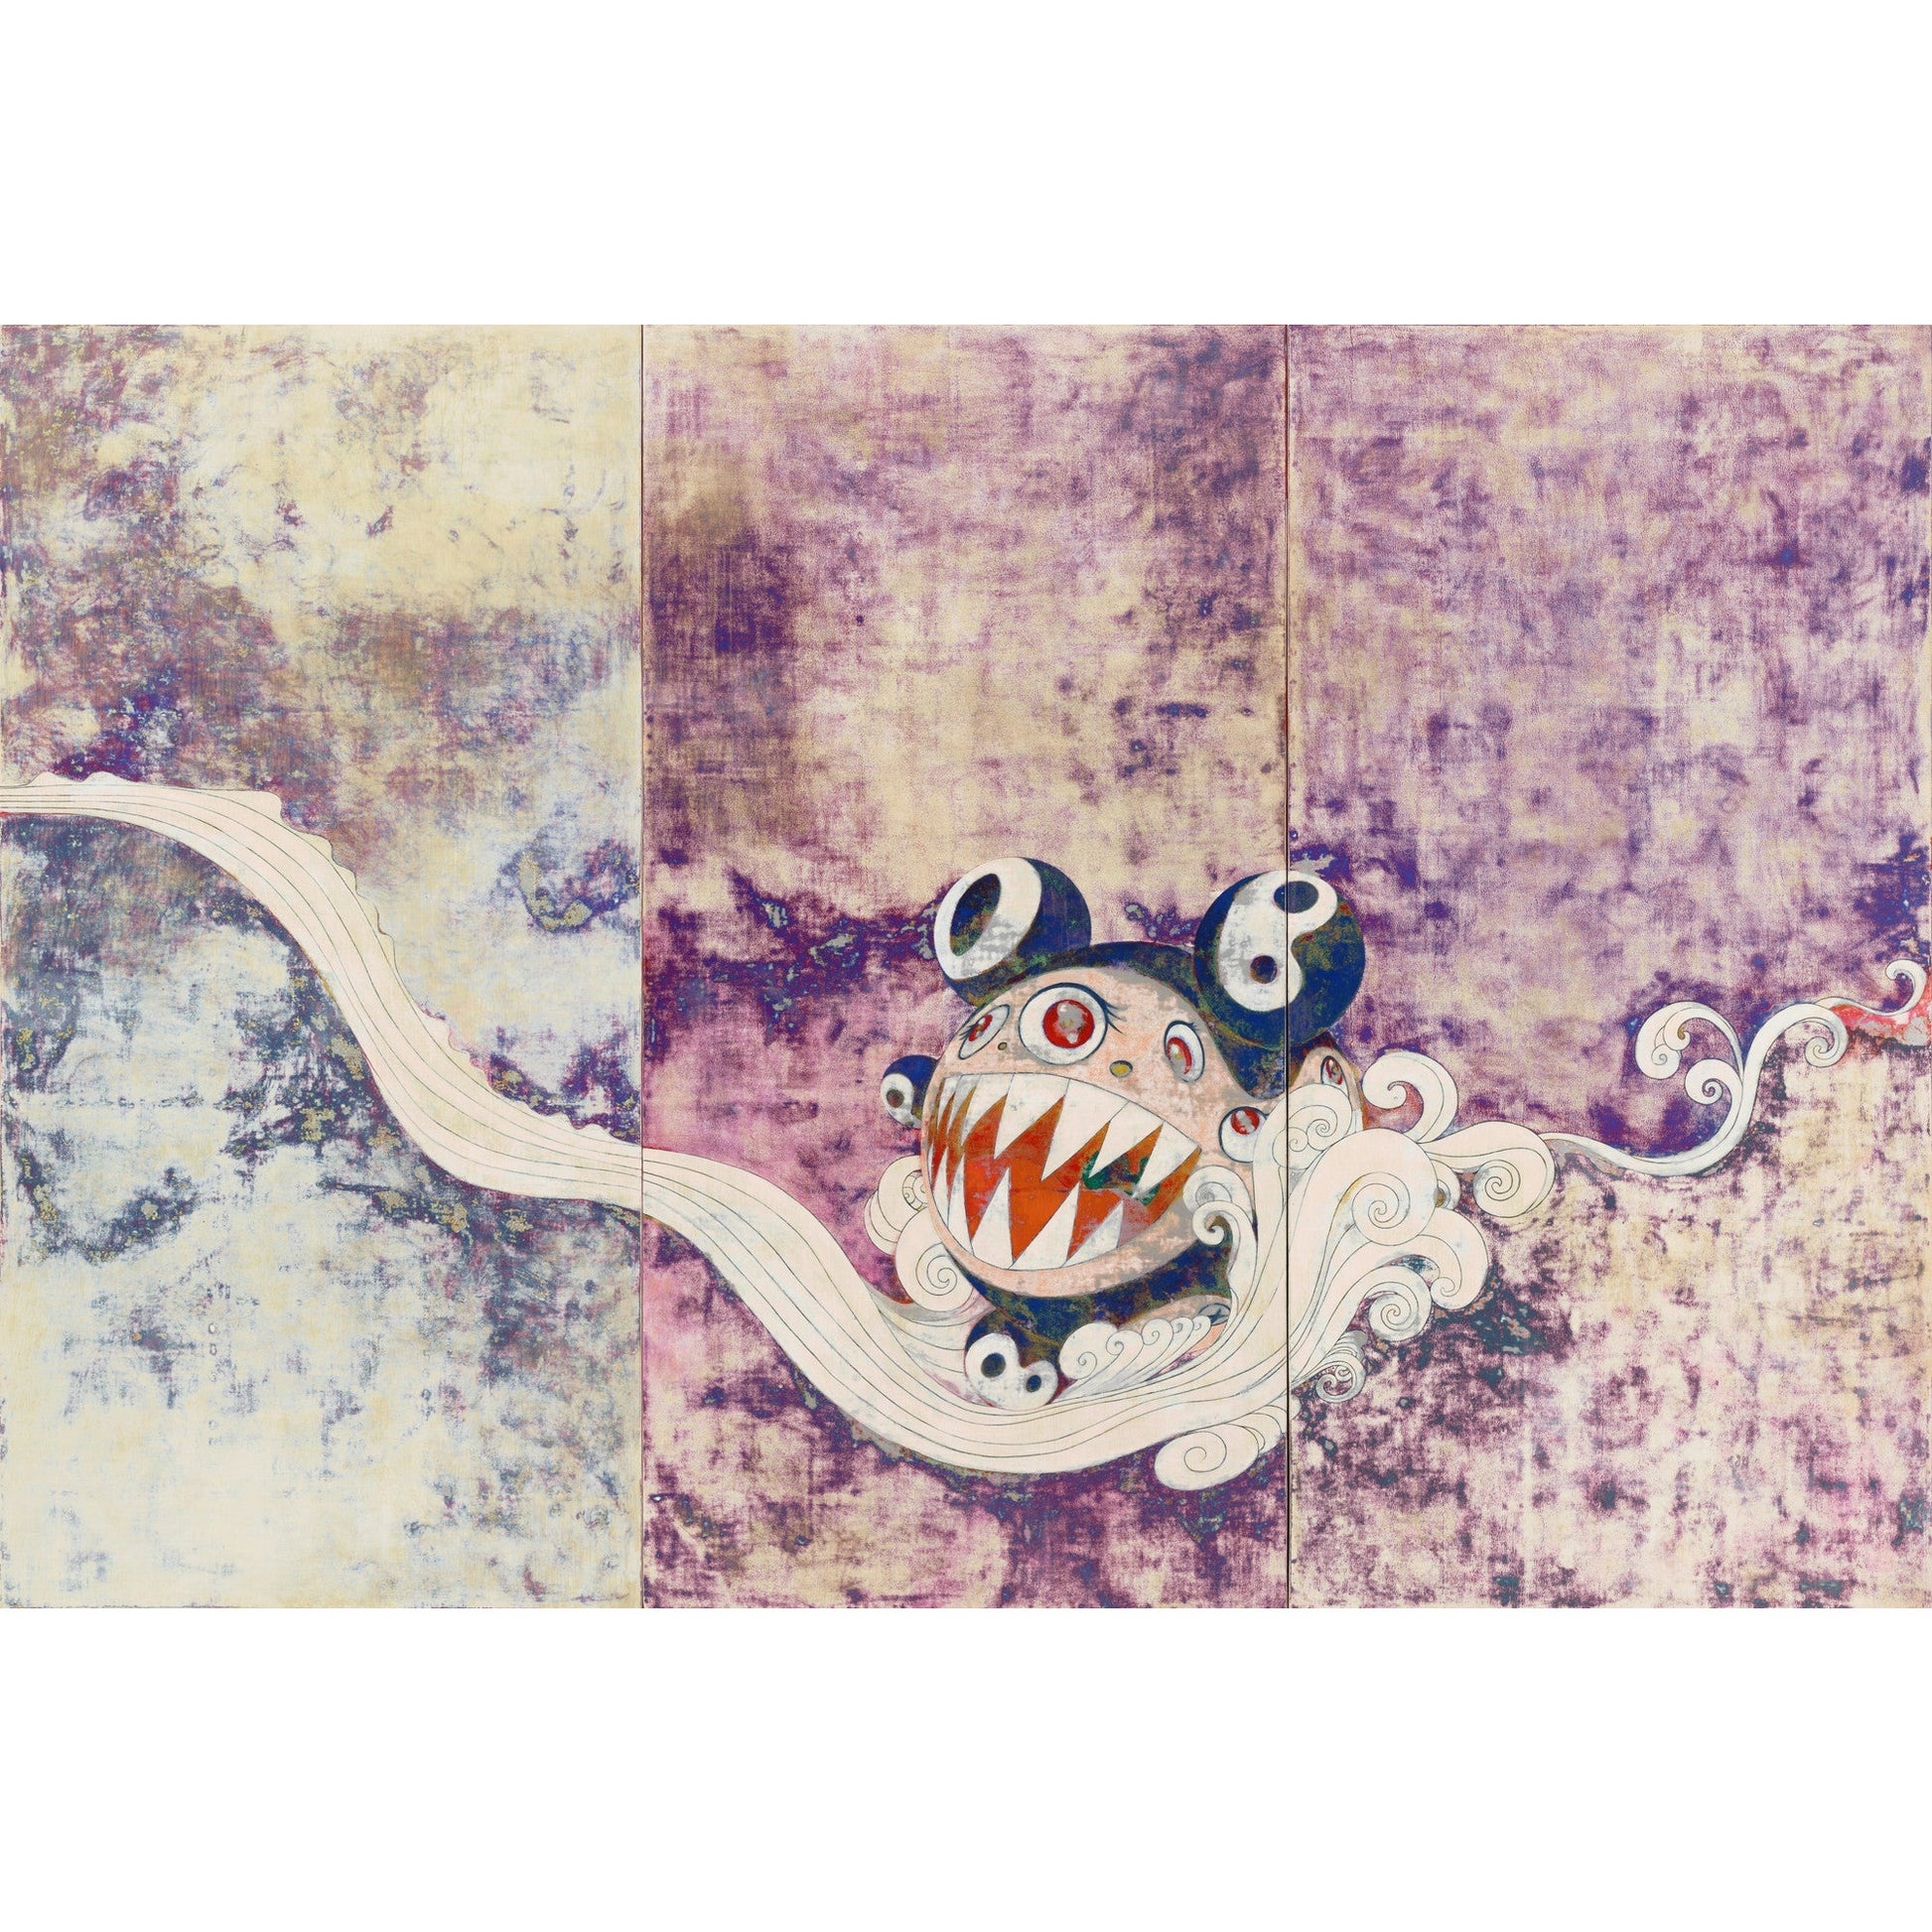 Takashi Murakami "727" Poster This unframed poster features a reproduction of Takashi Murakami's "727" (1996), a three-paneled painting in MoMA's collection. The work features Mr. DOB, a character created in 1993 who was among the first in a pantheon of characters inspired by the culture of anime (cartoons) and manga (comics) that emerged in Japan’s postwar era and became wildly popular in the 1980s.